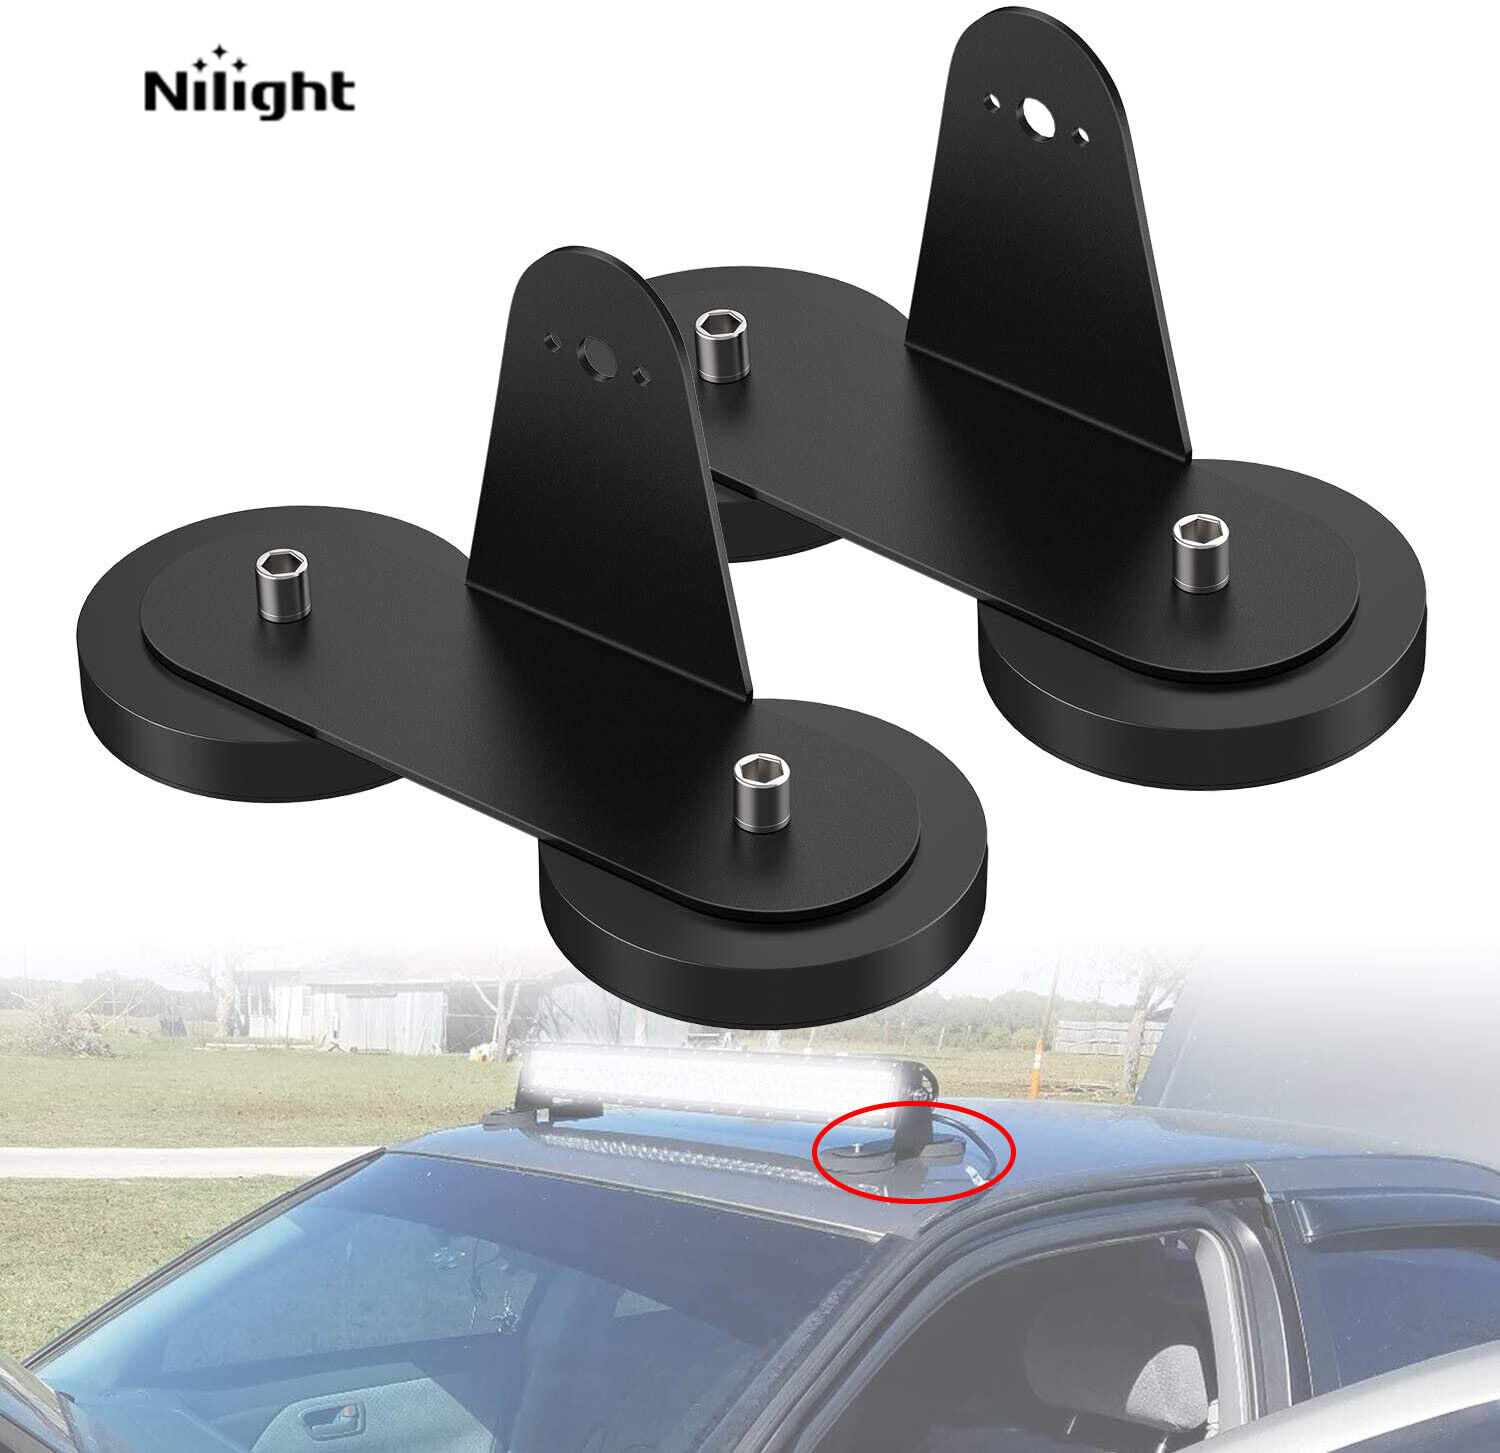 Nilight 2x Powerful Magnetic Base Mount Brackets for Roof LED Light Bar OffRoad